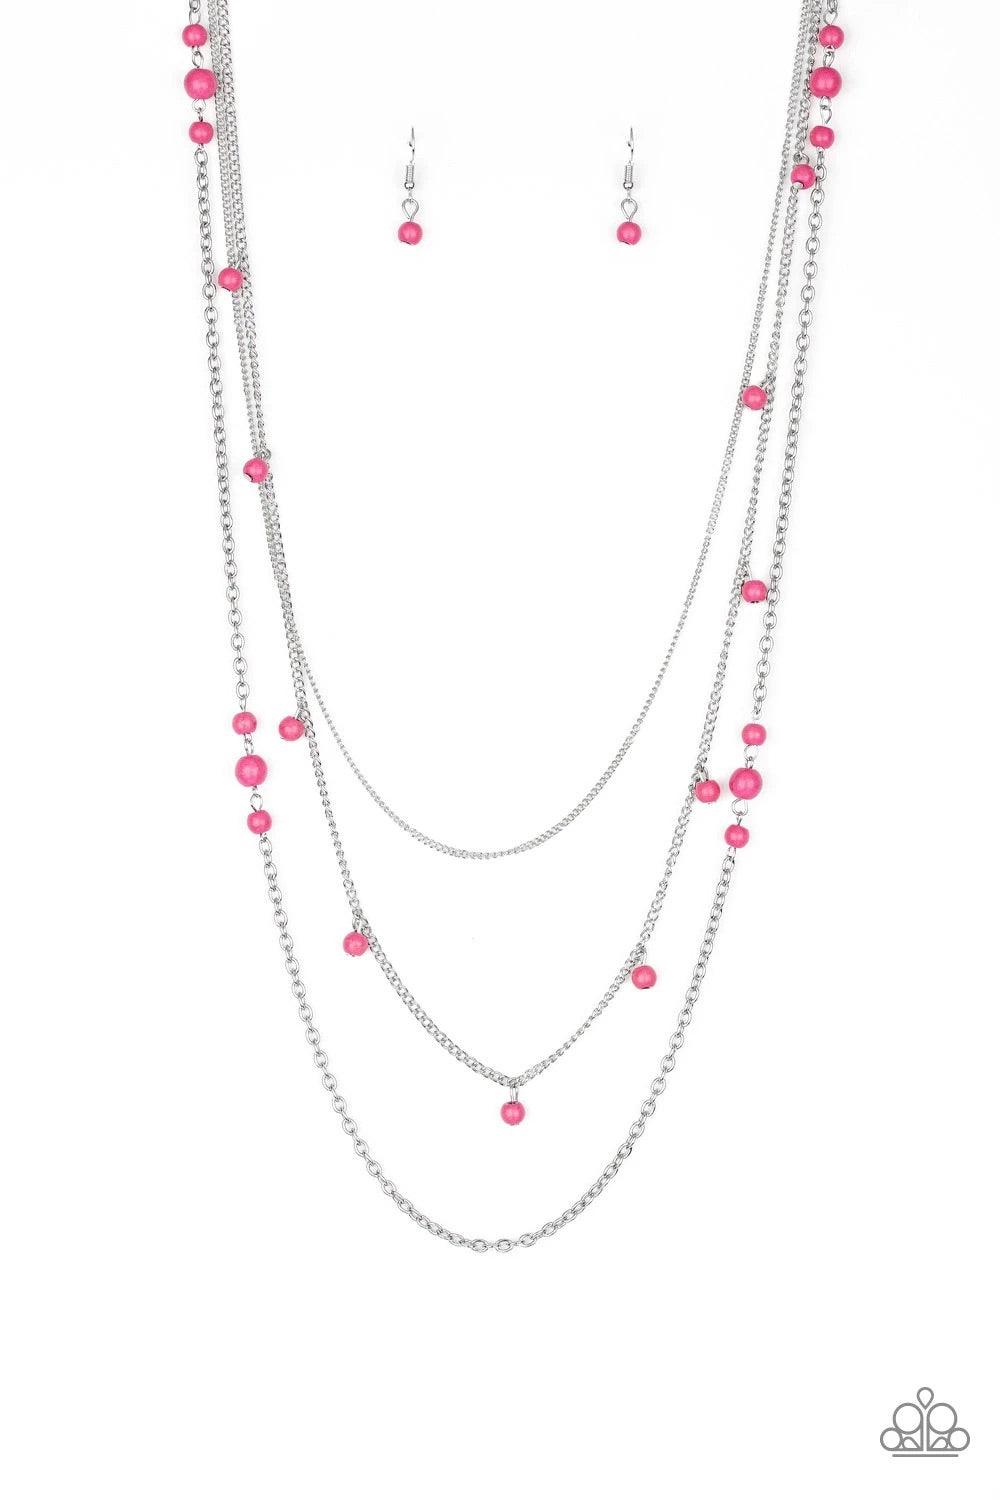 Paparazzi Accessories Laying The Groundwork - Pink Infused with a plain silver chain, mismatched pink stone beads sporadically trickle along shimmery silver chains, creating vivacious layers down the chest. Features an adjustable clasp closure. Sold as on